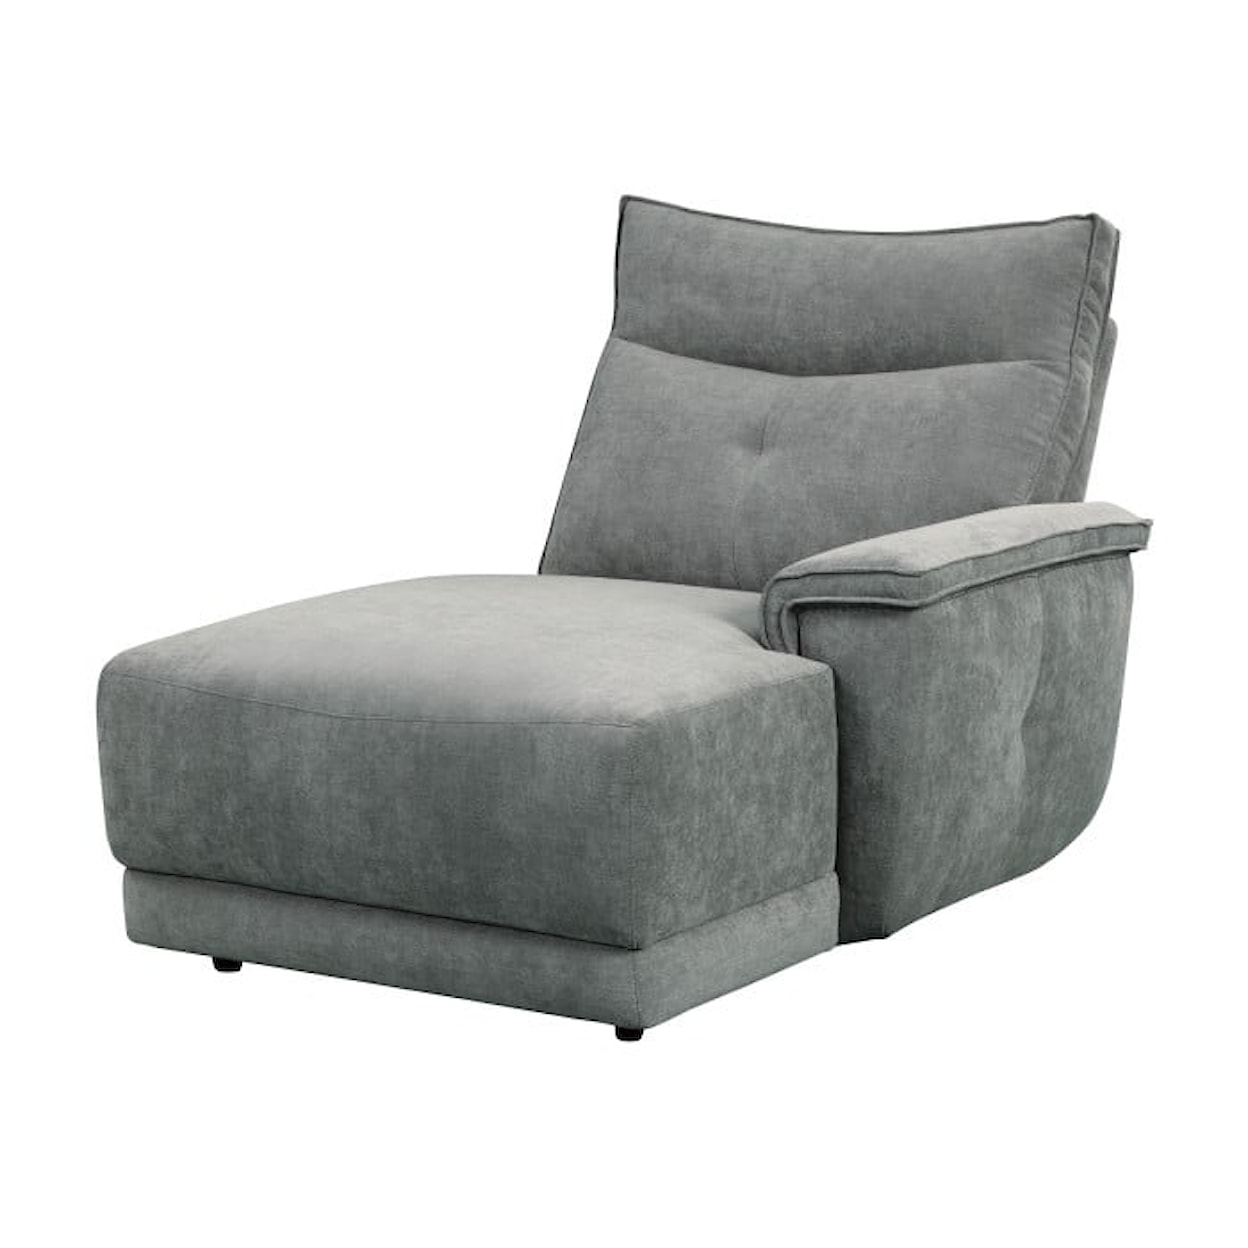 Homelegance Furniture Tesoro Right Side Chaise